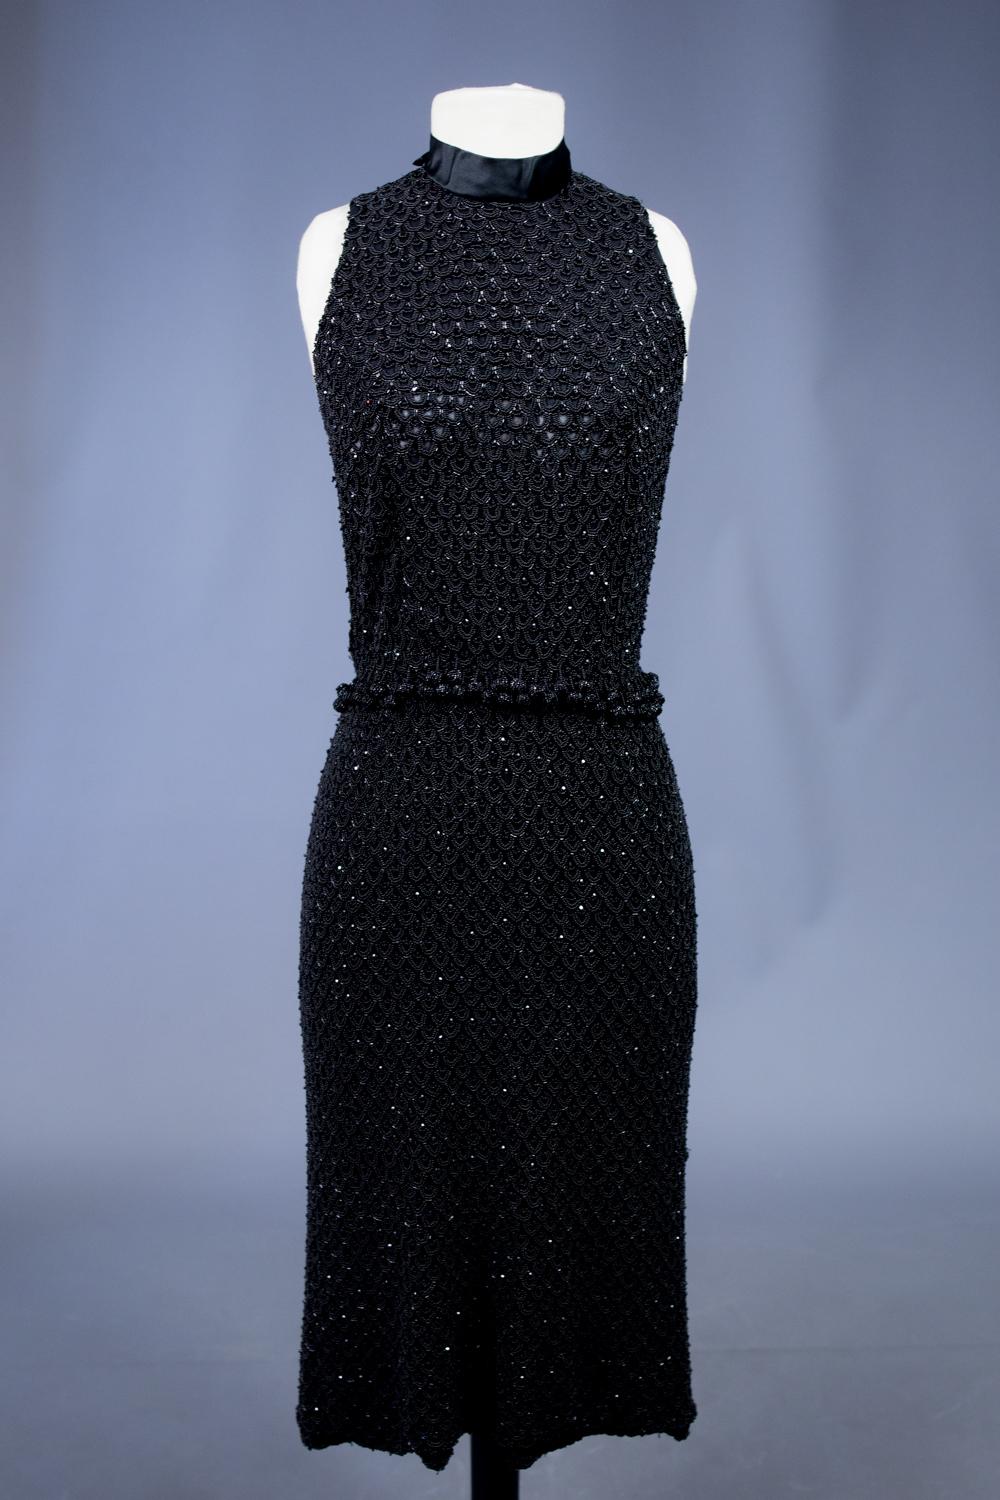 Circa 1960/1965

France

Elegant cocktail dress entirely embroidered with black jet beads probably Haute Couture, inspired by Chinese qipao and dating from the 1960s. Sheath dress, low-cut shoulders and Mao collar in black satin adorned with a